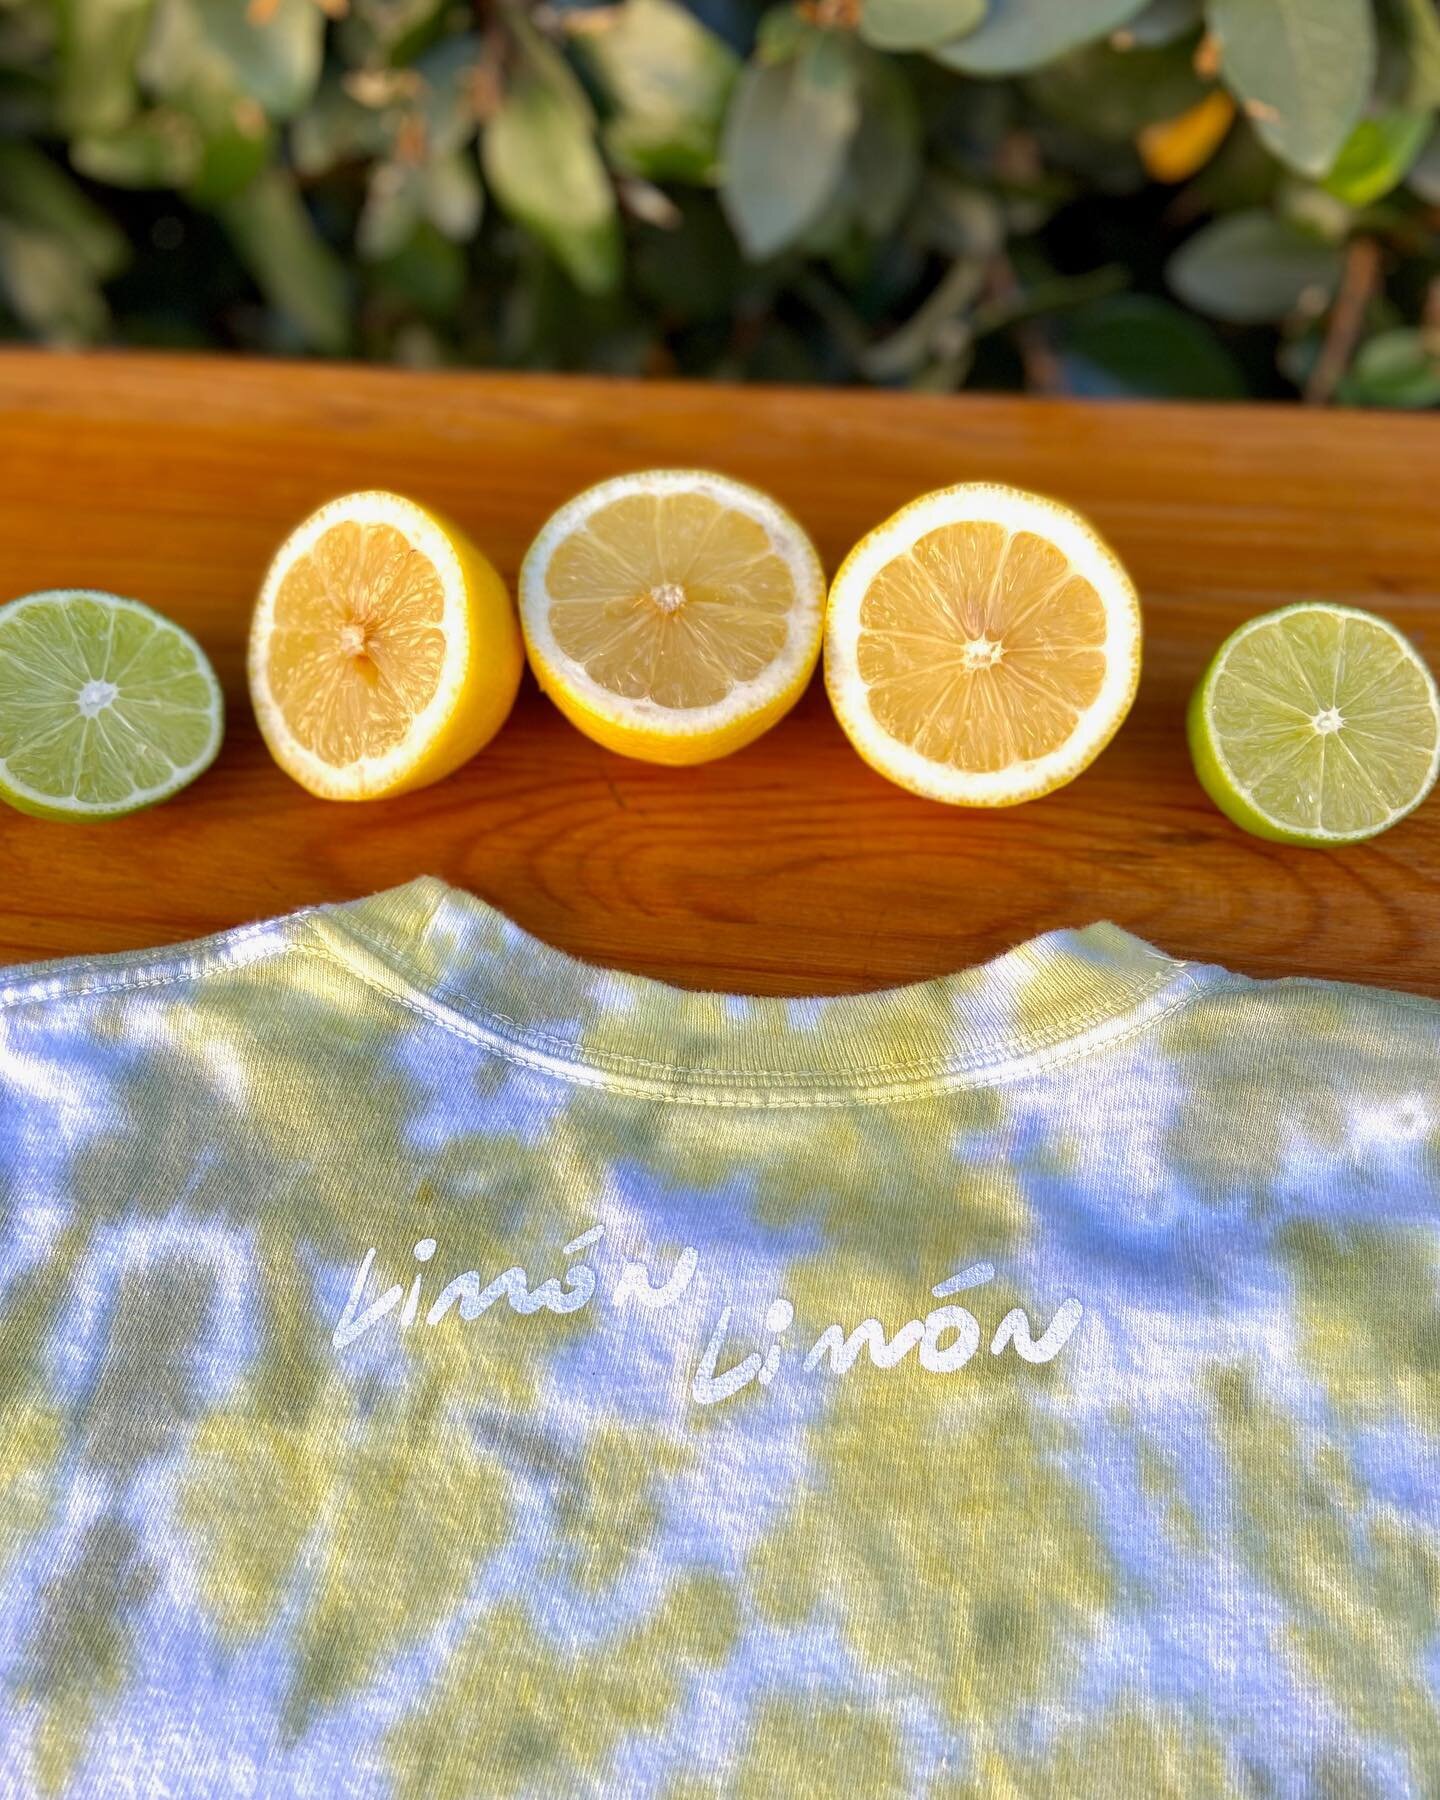 JUICY NEWS! 🍋✨After spending months and months and many long days and nights designing our next wave of t-shirts, the Citric Tie Dye Tee is finally here! We are so happy with how these turned out and we really spent a lot of time to make sure the qu